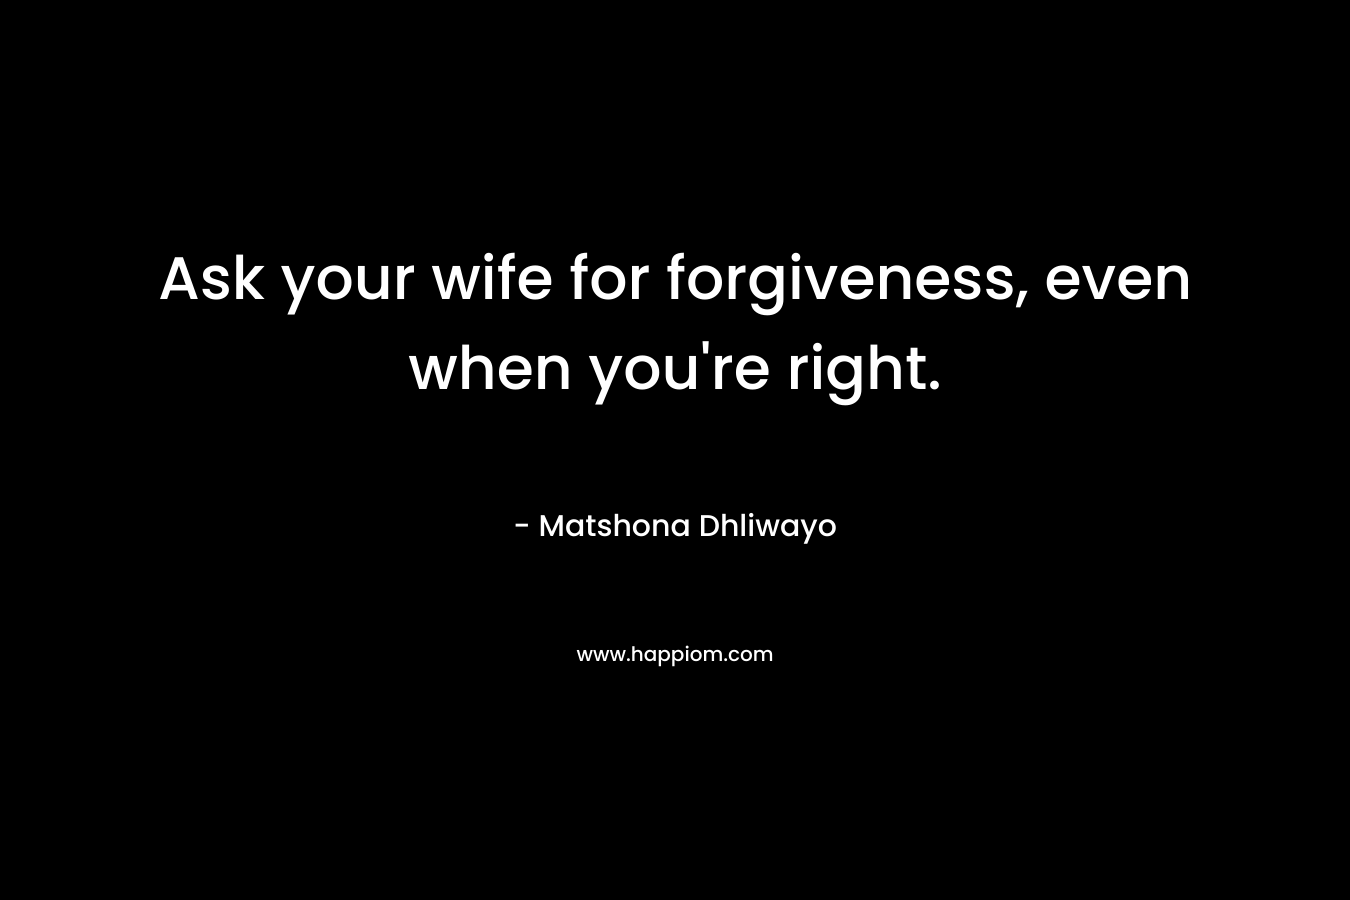 Ask your wife for forgiveness, even when you’re right. – Matshona Dhliwayo